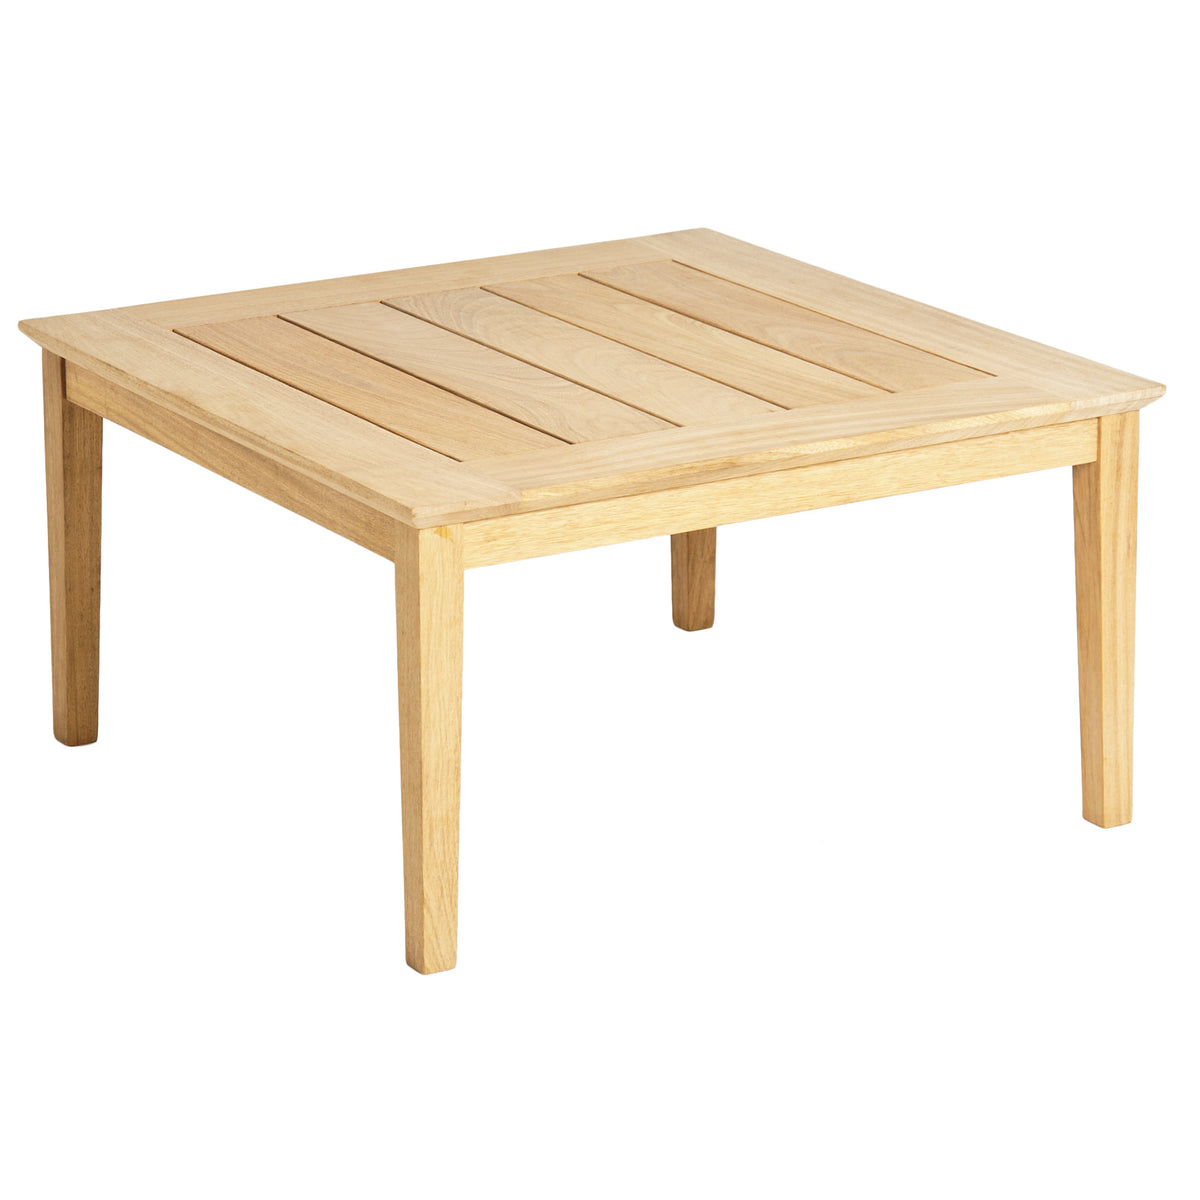 Alexander Rose Roble Side Table (0.8m x 0.8m)